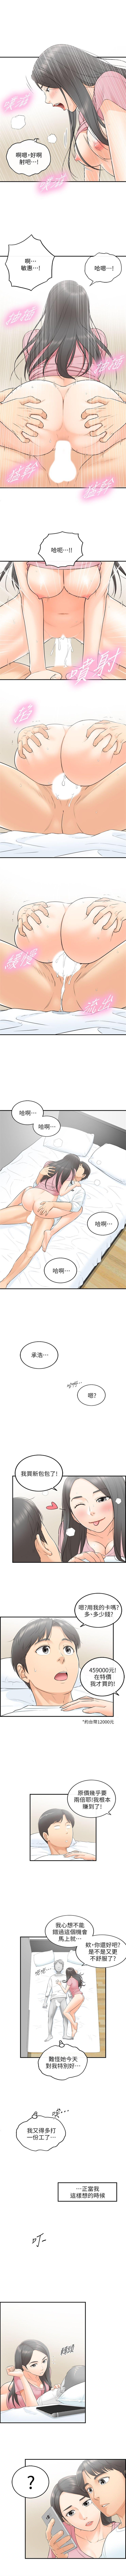 Sister 正妹小主管 1-51 官方中文（連載中） Passionate - Page 7